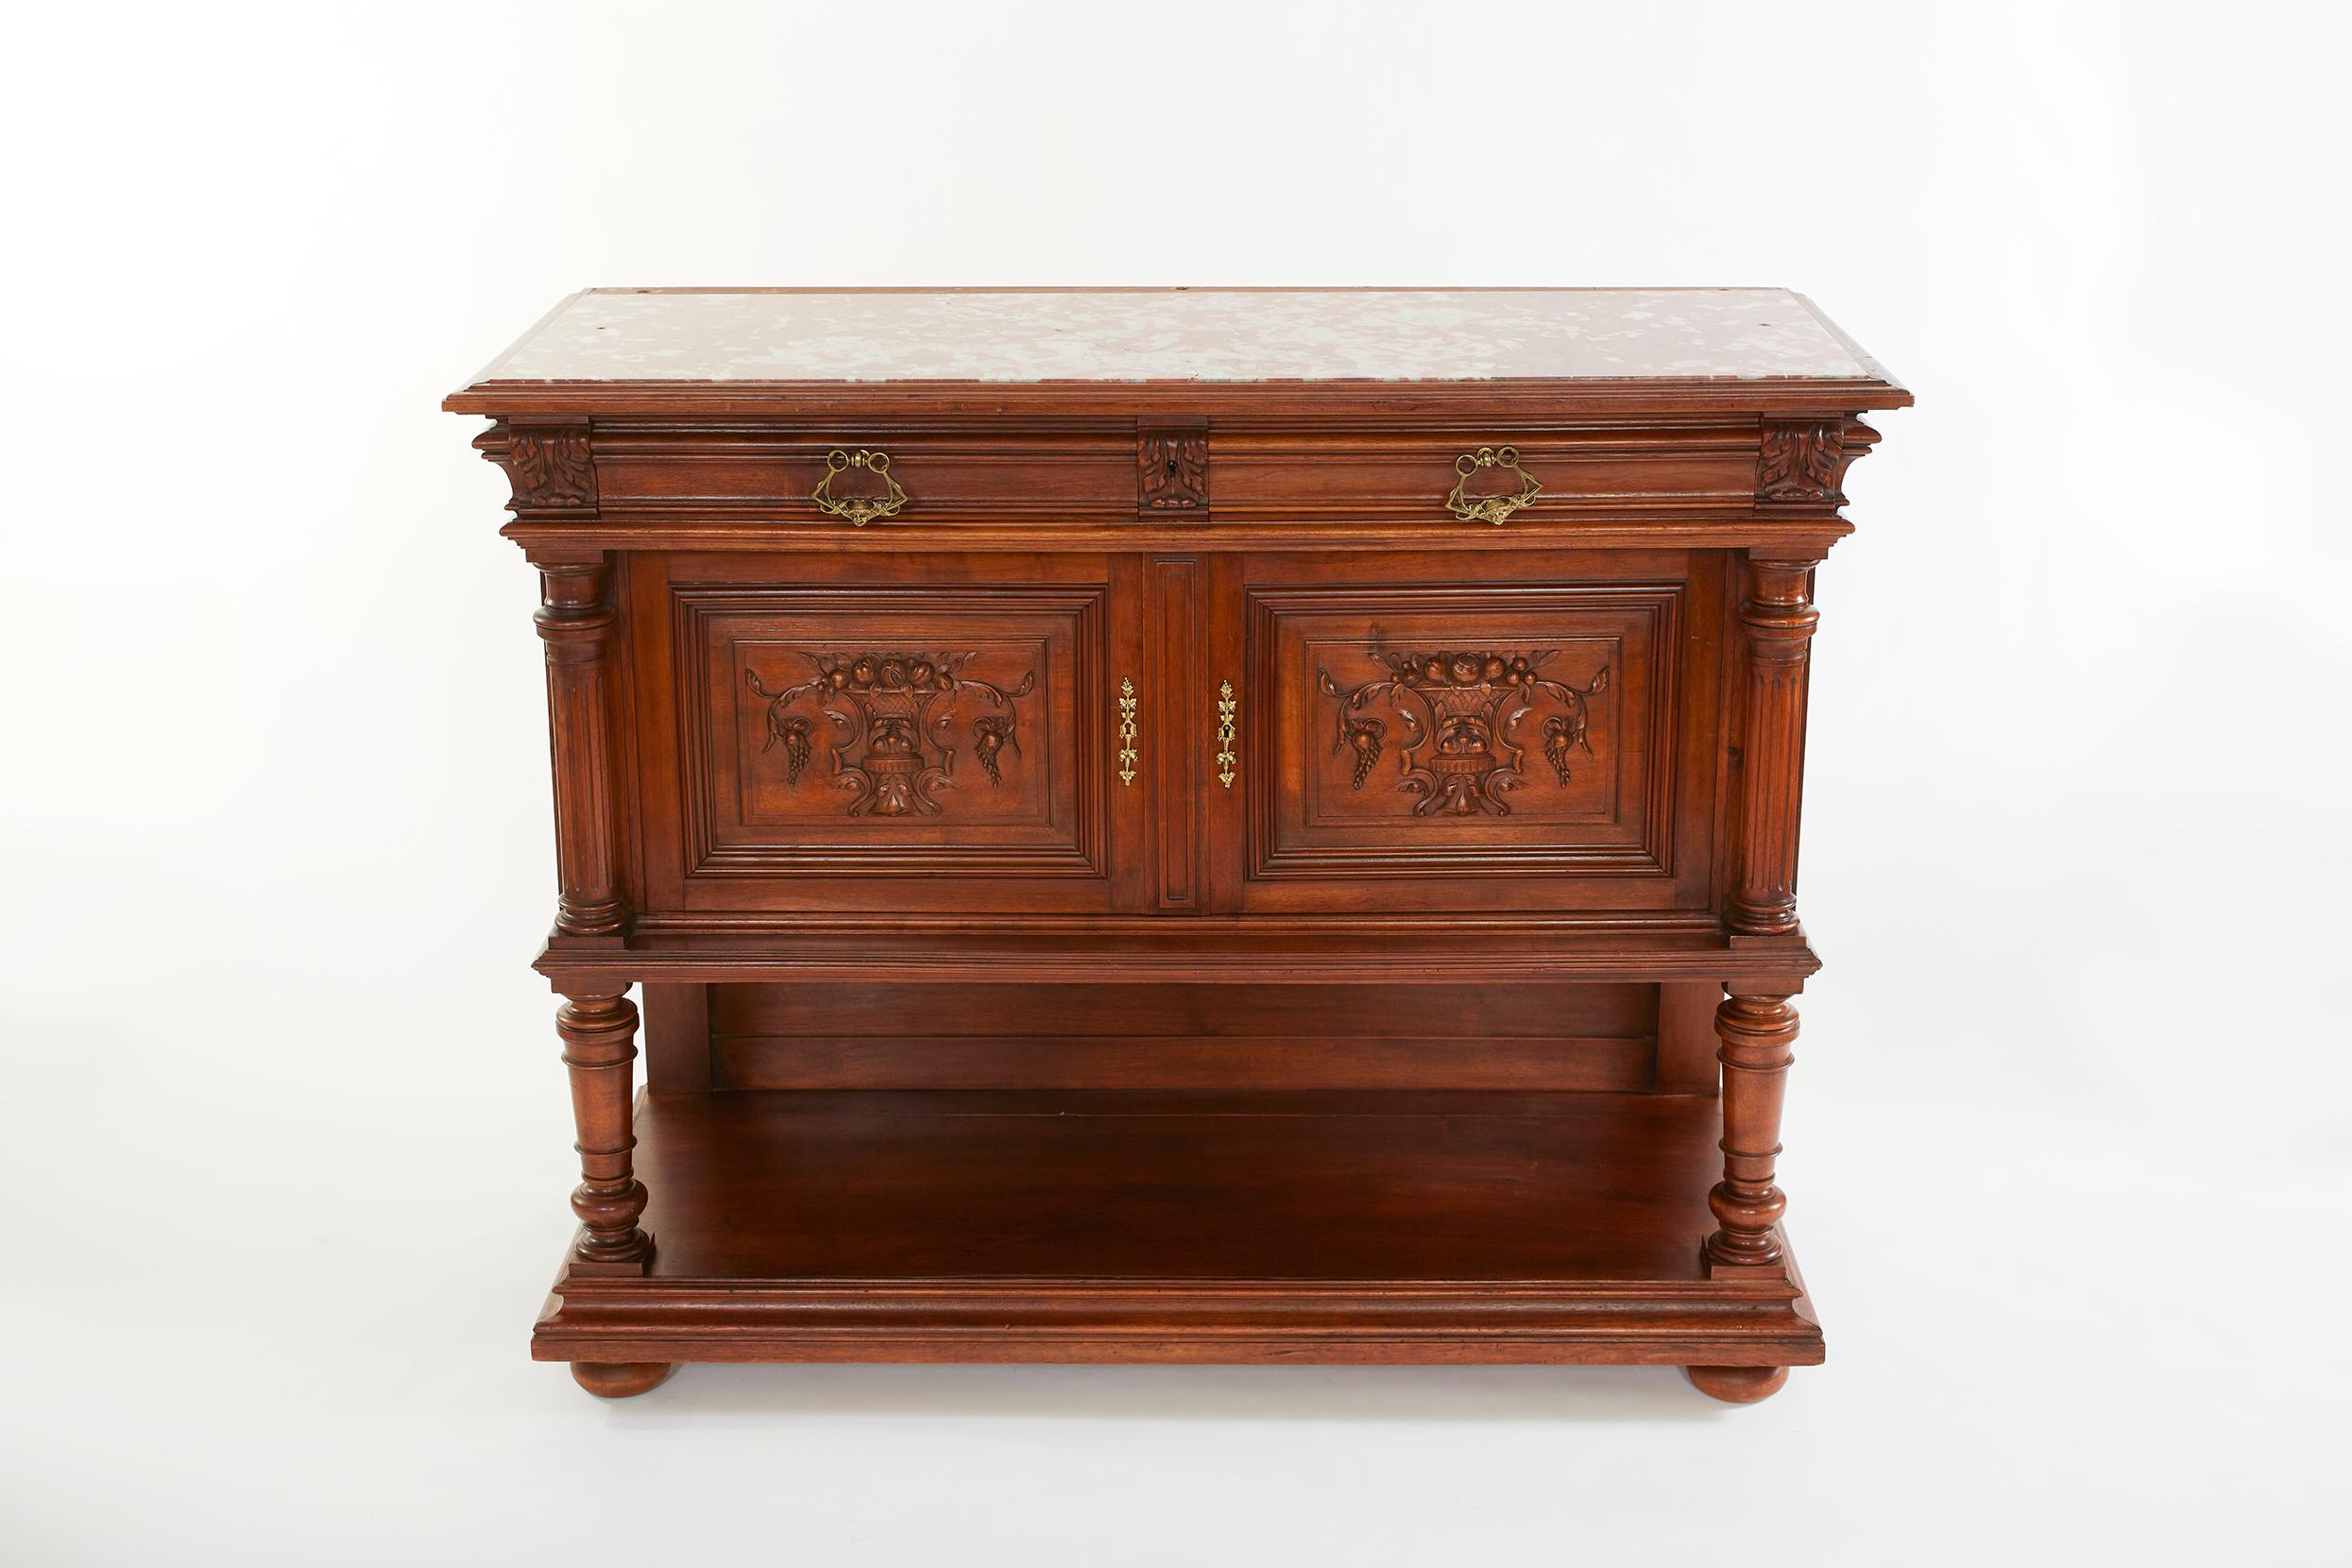 Mid 19th century French carved oak renaissance style server / sideboard with front doors / front drawers and exterior hand carved design details. The sideboard / server is in great condition. Minor wear consistent with age / use. The server measure